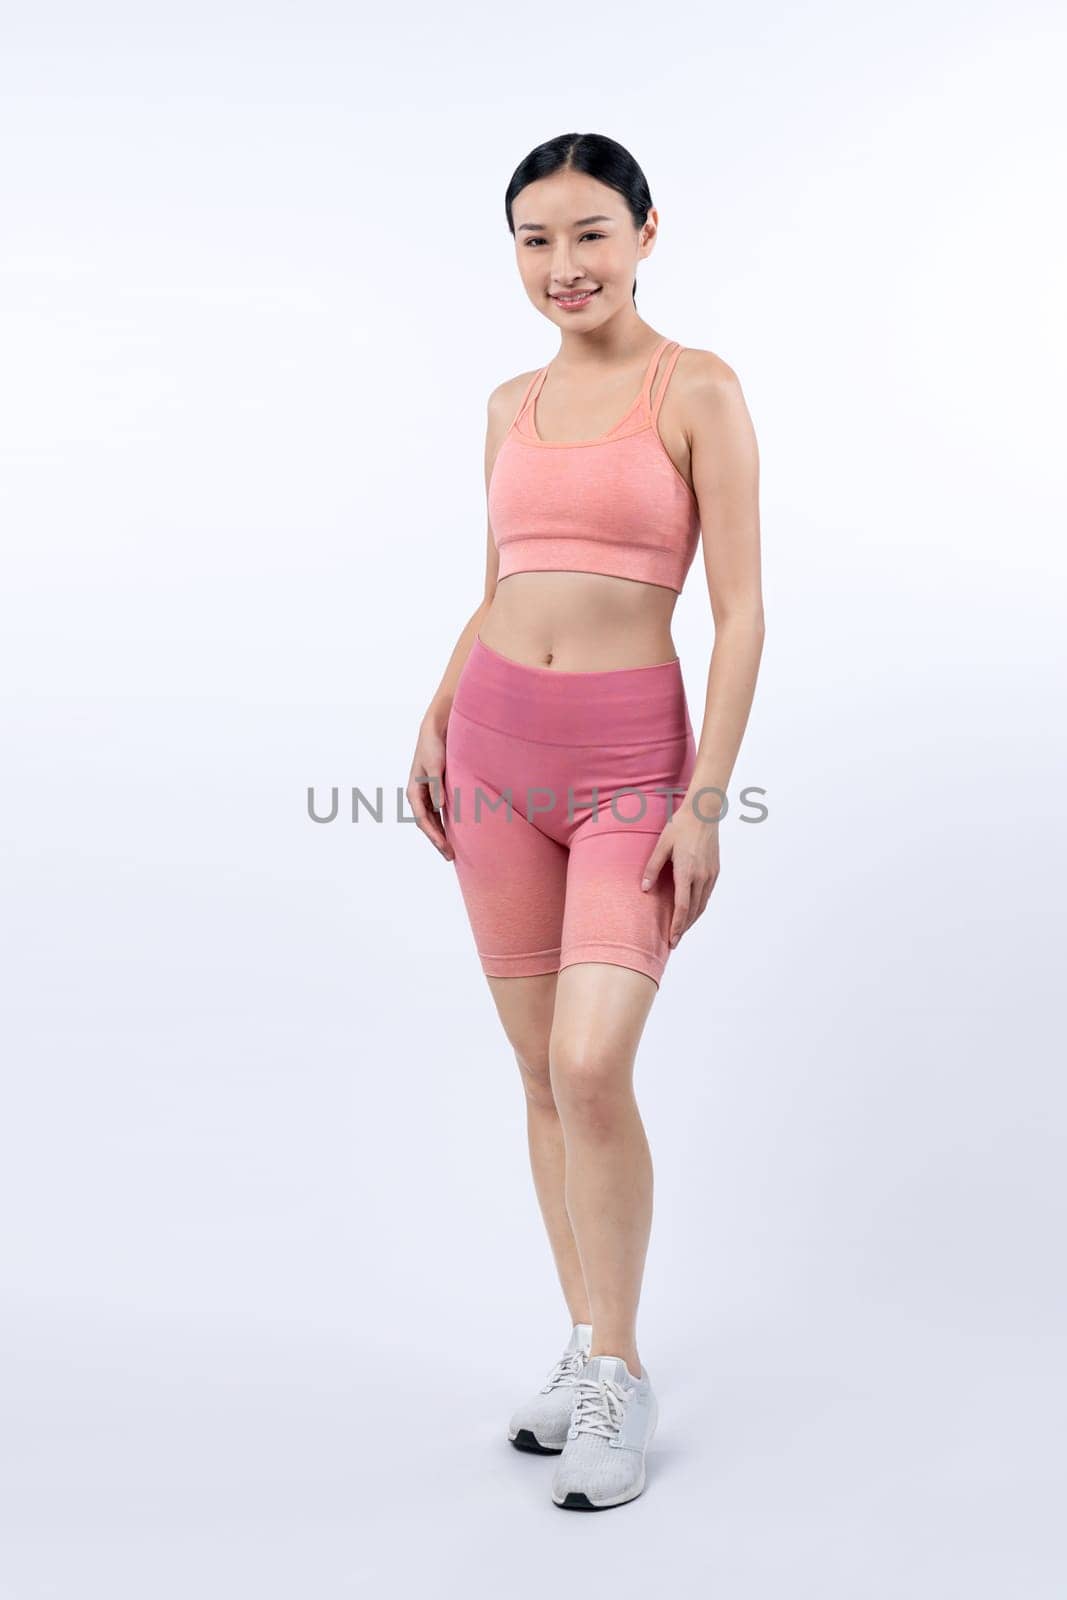 Full body asian woman in sportswear portrait, smiling and posing cheerful gesture. Workout training with attractive girl engage in her pursuit of healthy lifestyle. Isolated background Vigorous